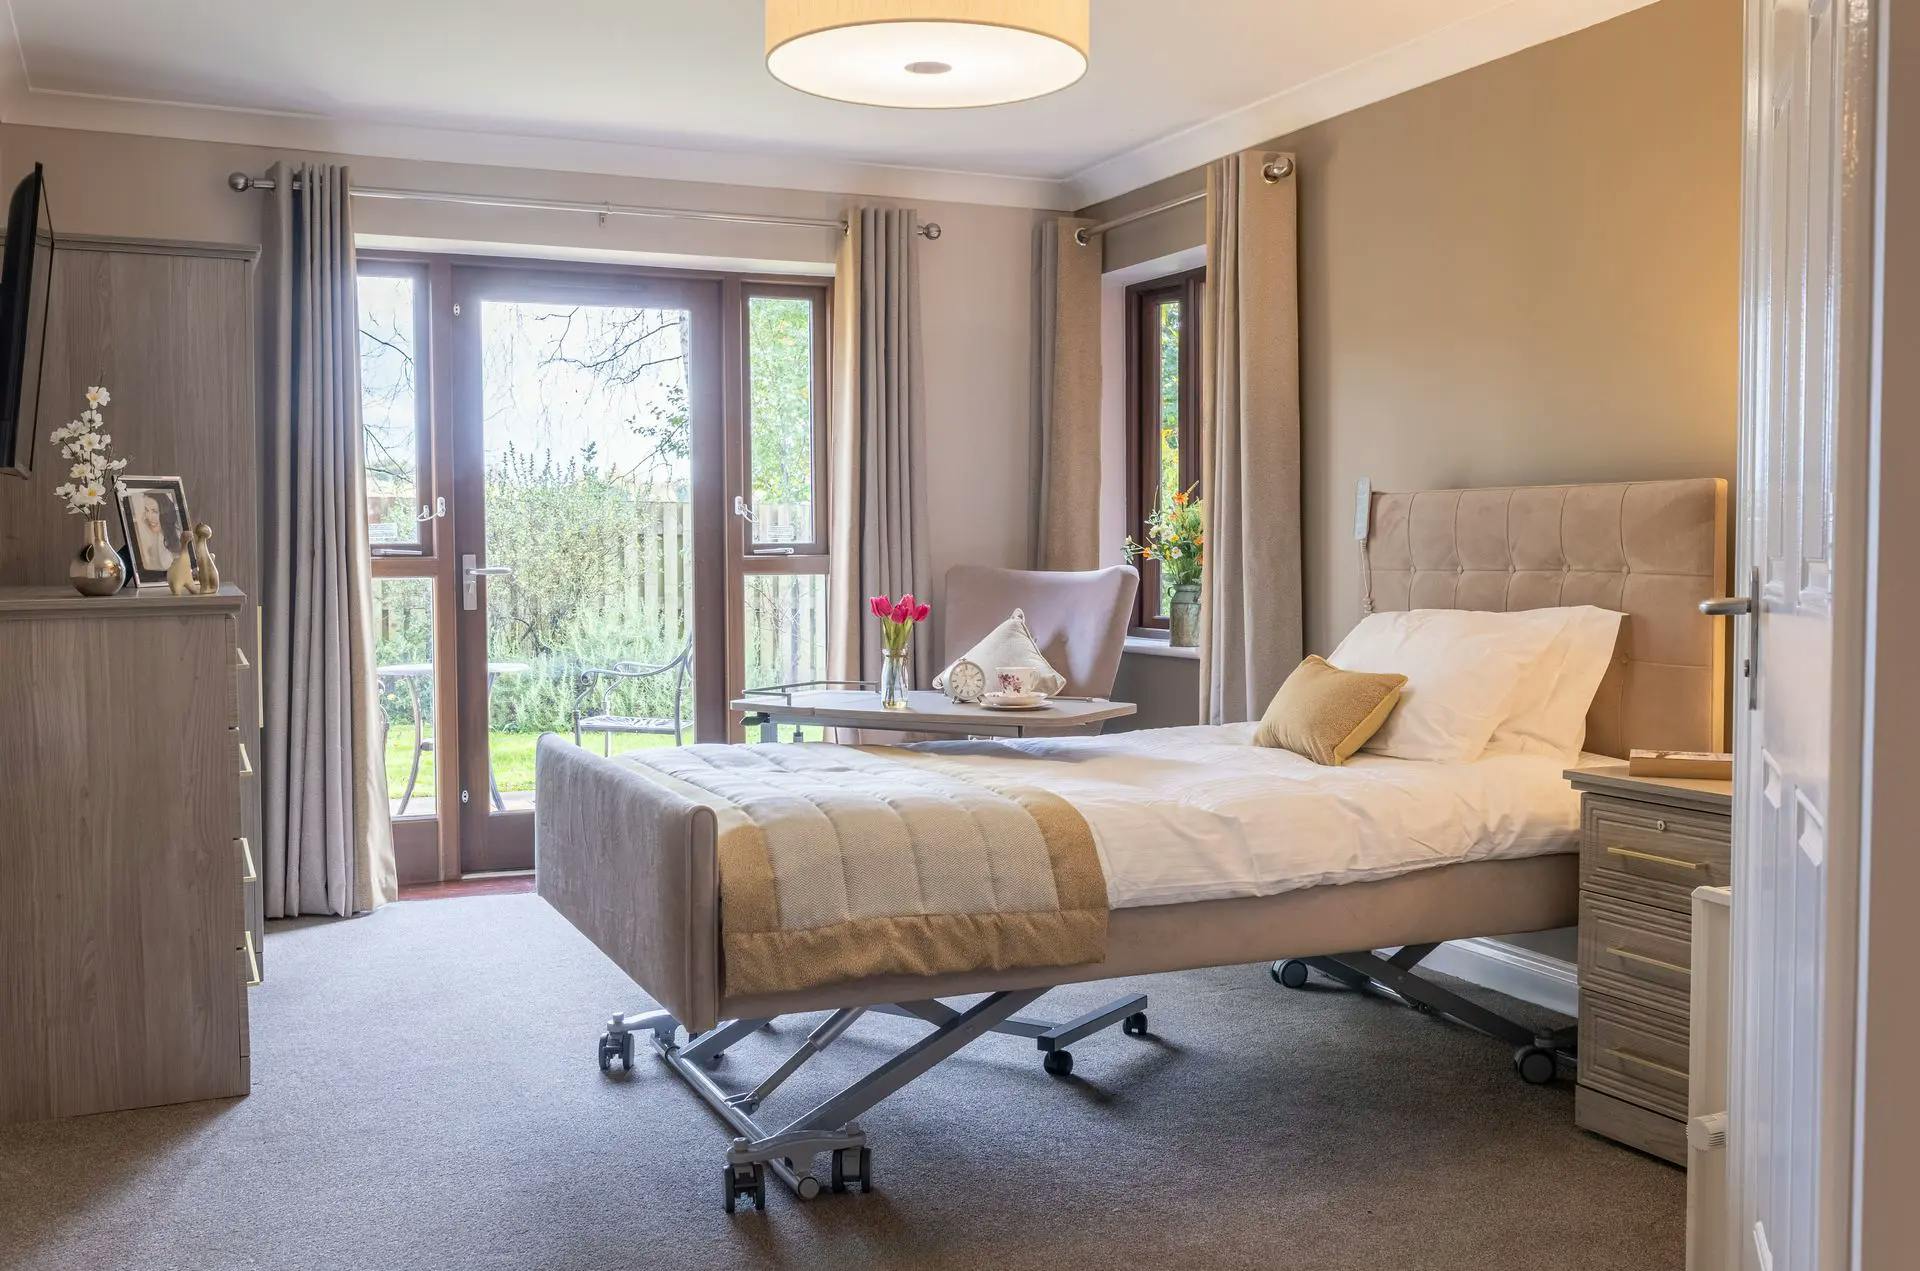 Bedroom at Abbeycrest Care Home in Reading, Berkshire